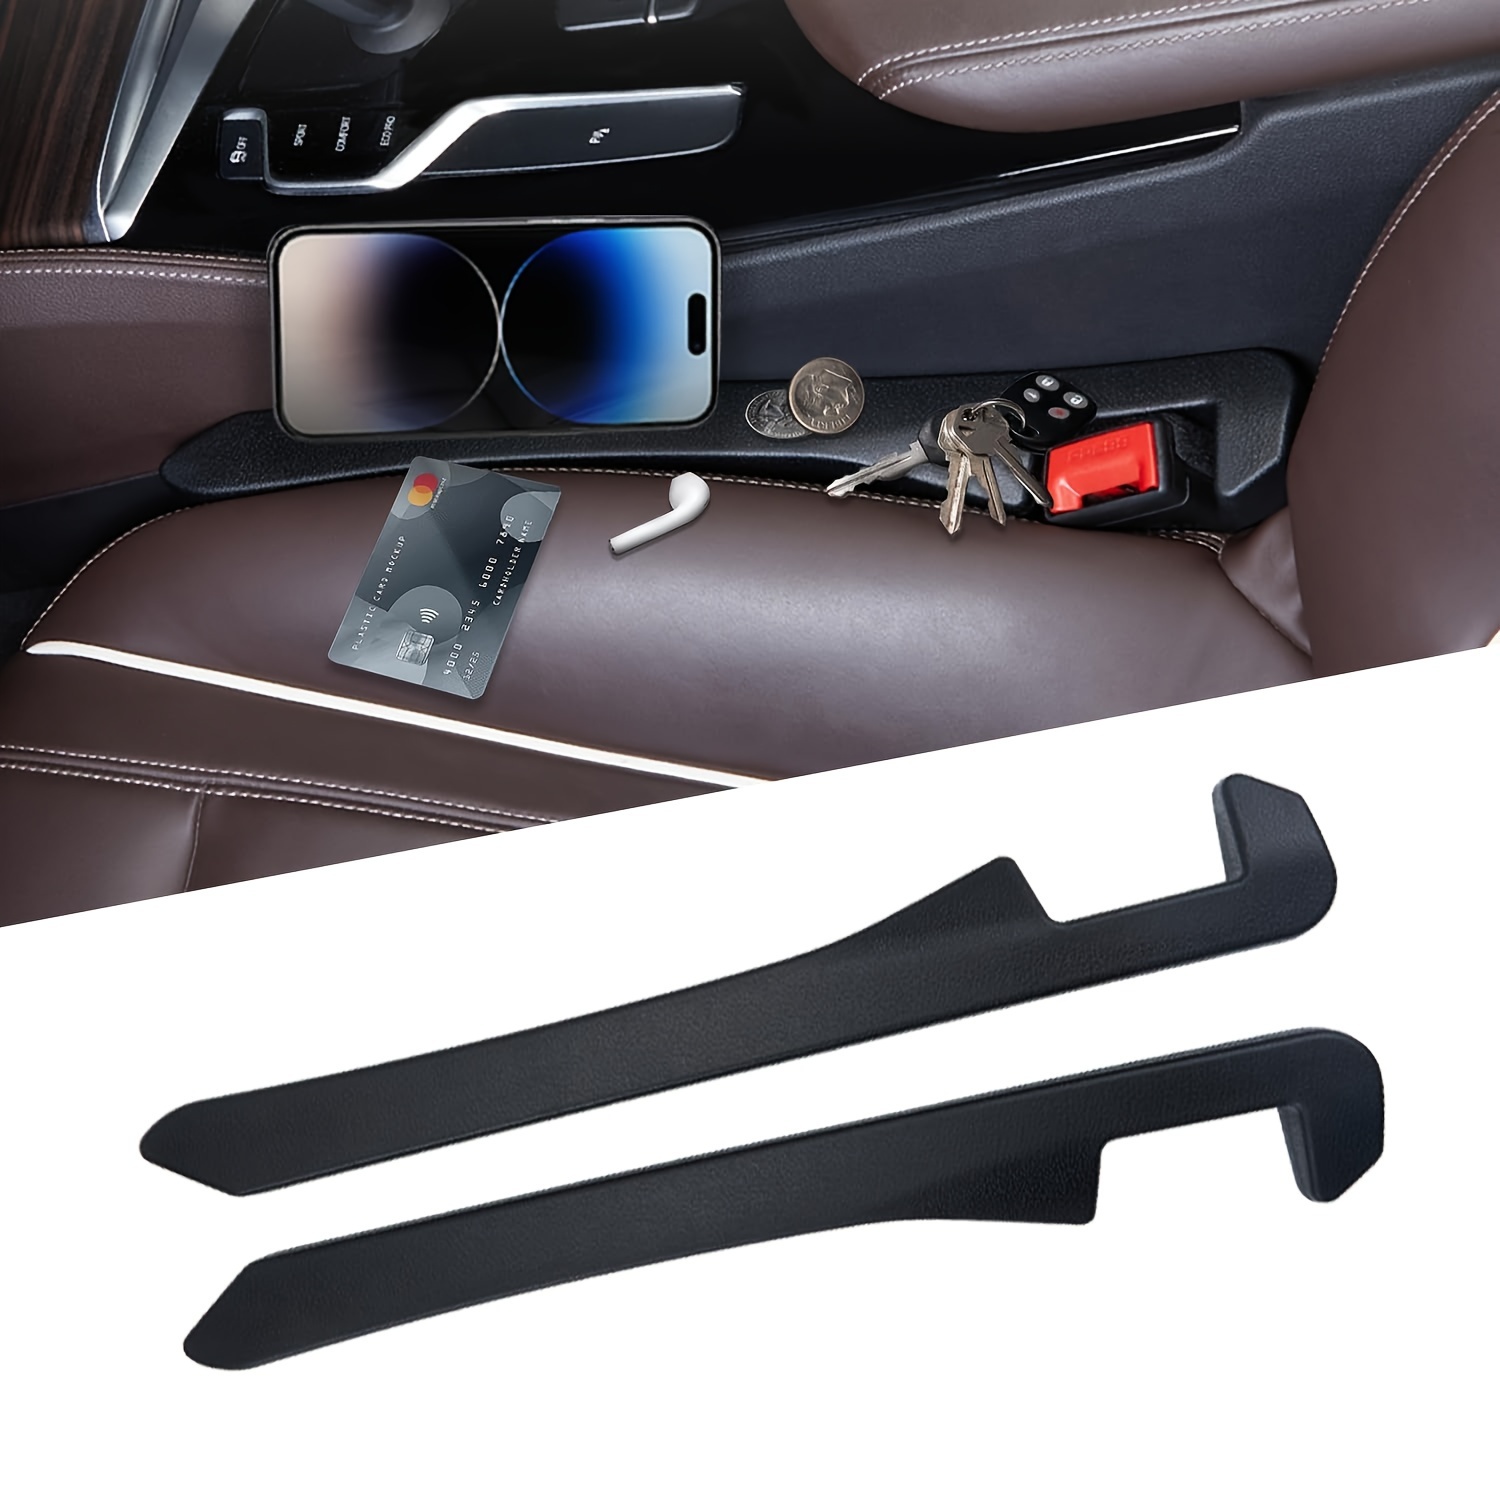 Leather Car Seat Gap Filler Universal for Car Truck SUV to Block The Gap  Between Seat and Console